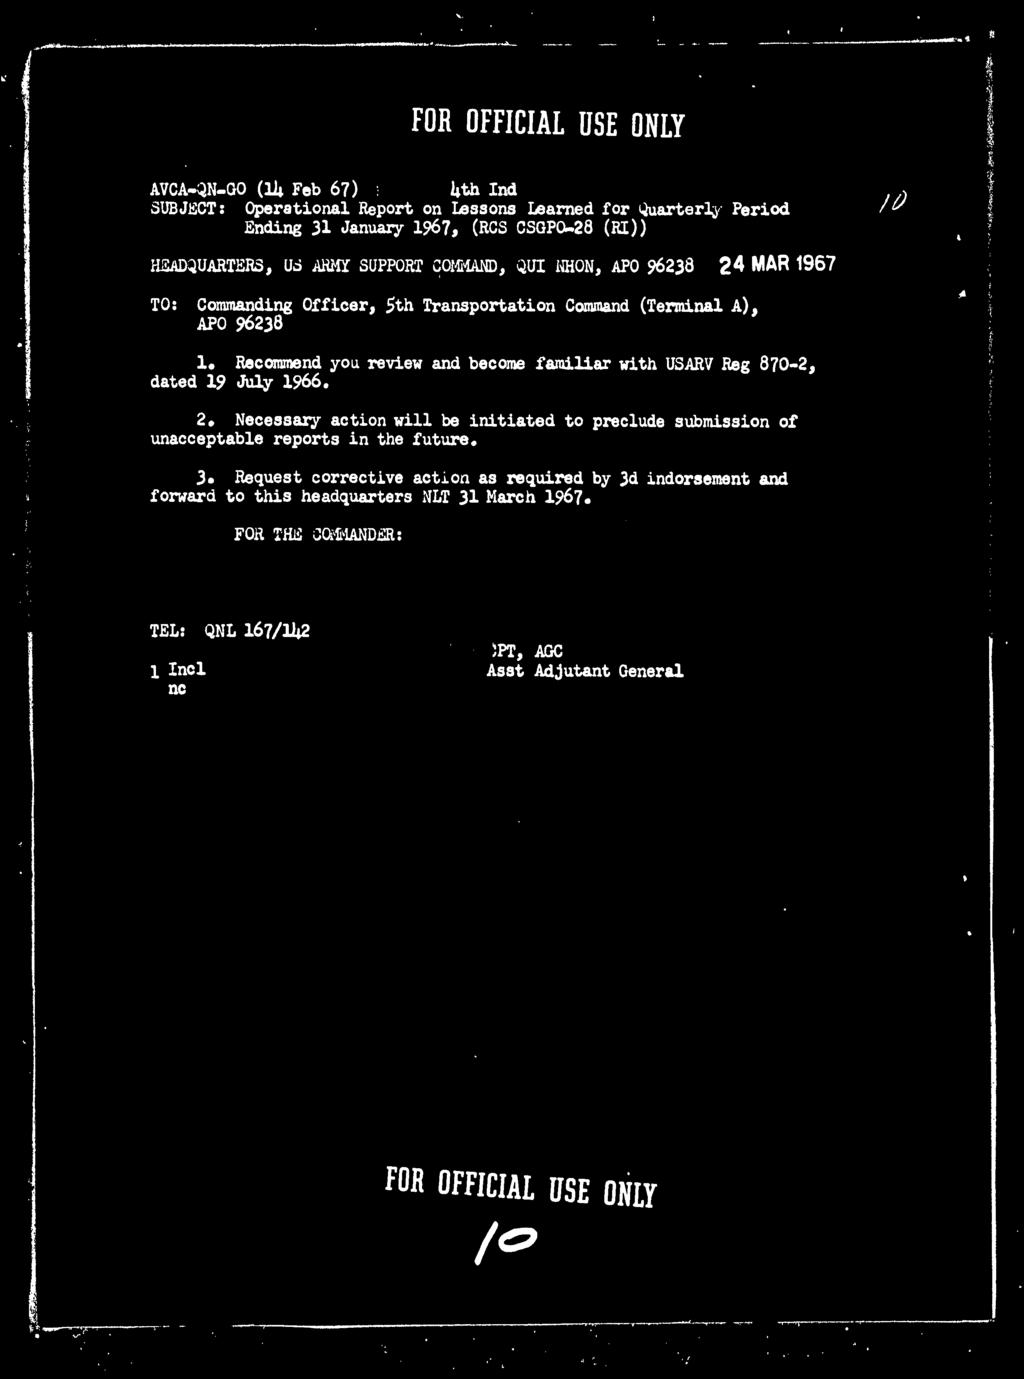 FOR OFFICIAL OS ONLY AVCA-QN-GO (Ik Feb 67) ; i*th Ind ; SUBJECT: Operational Report on Lessons Learned for Quarterly Period /^ Ending 31 January 1967, (RCS CSGPCU28 (RI)) HEADQUARTERS, US ARMY